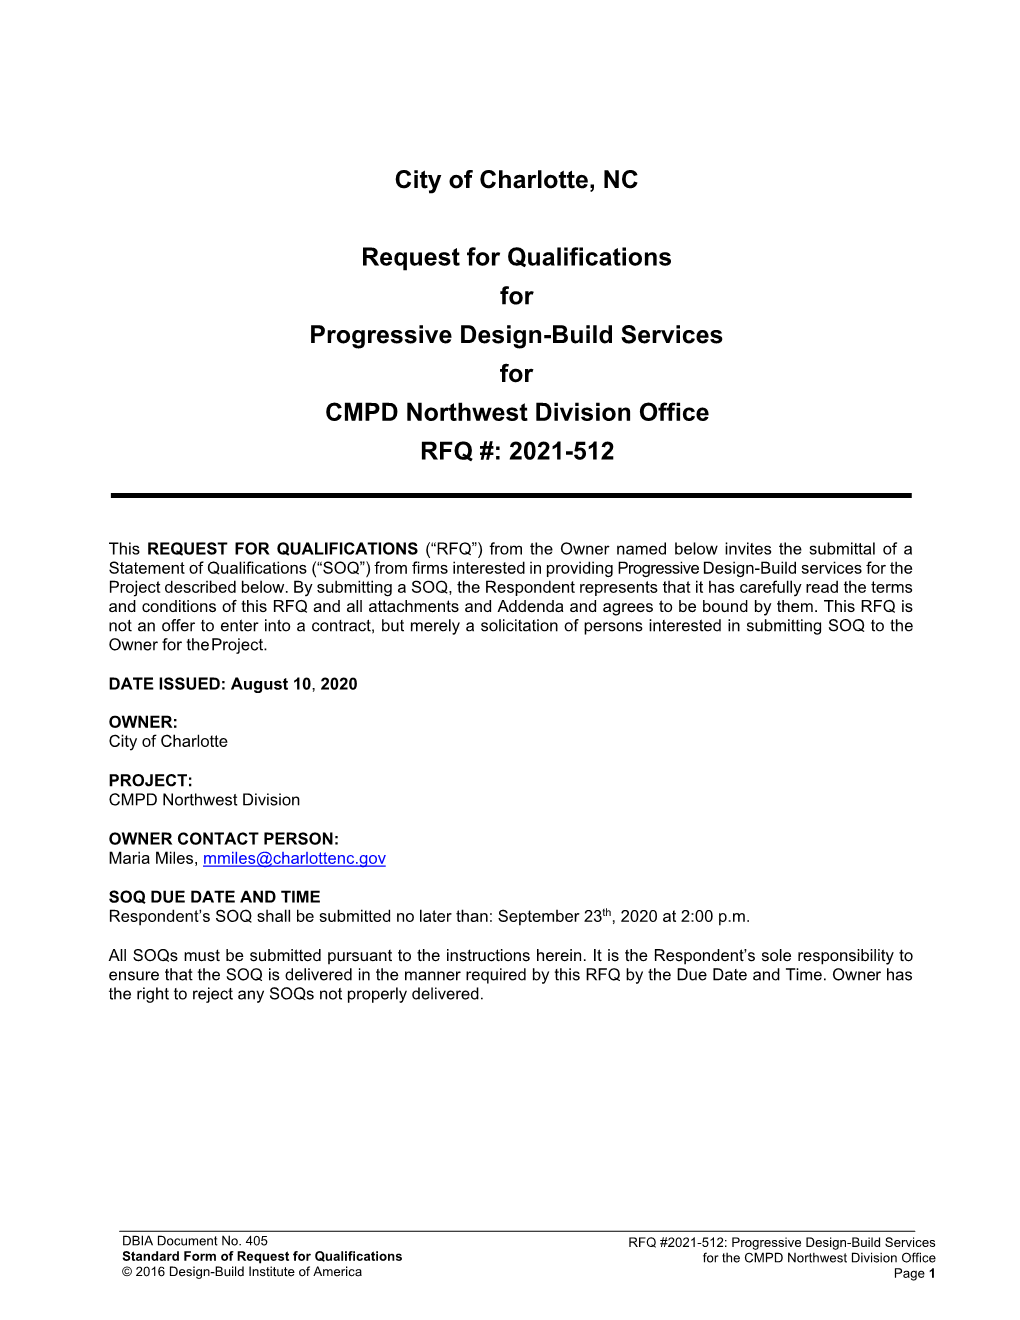 City of Charlotte, NC Request for Qualifications For